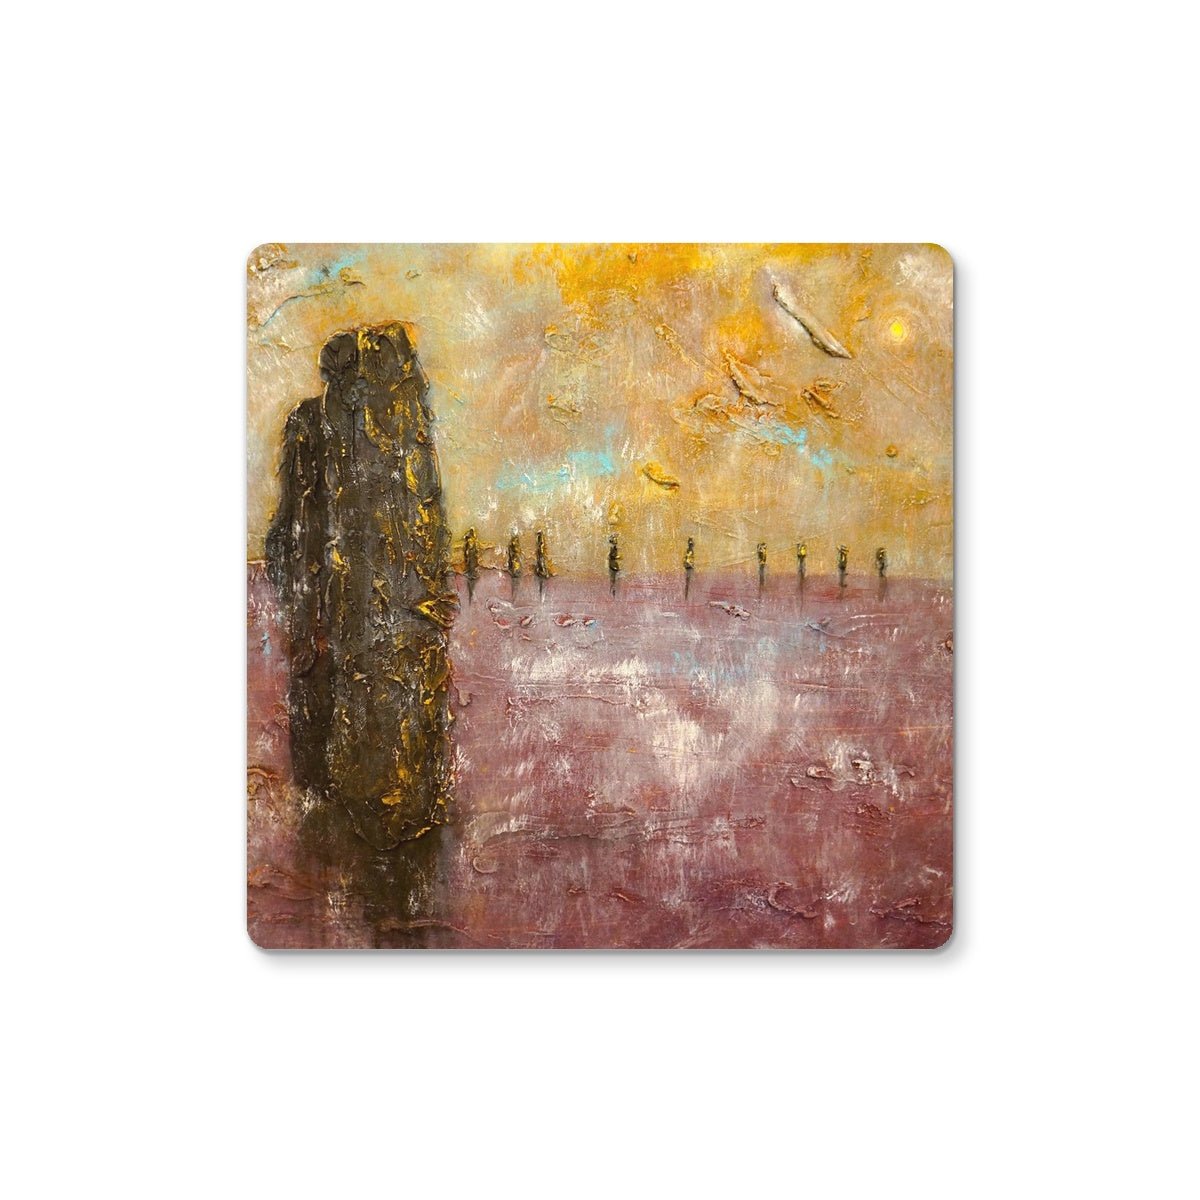 Bordgar Mist Orkney Art Gifts Coaster-Coasters-Orkney Art Gallery-6 Coasters-Paintings, Prints, Homeware, Art Gifts From Scotland By Scottish Artist Kevin Hunter